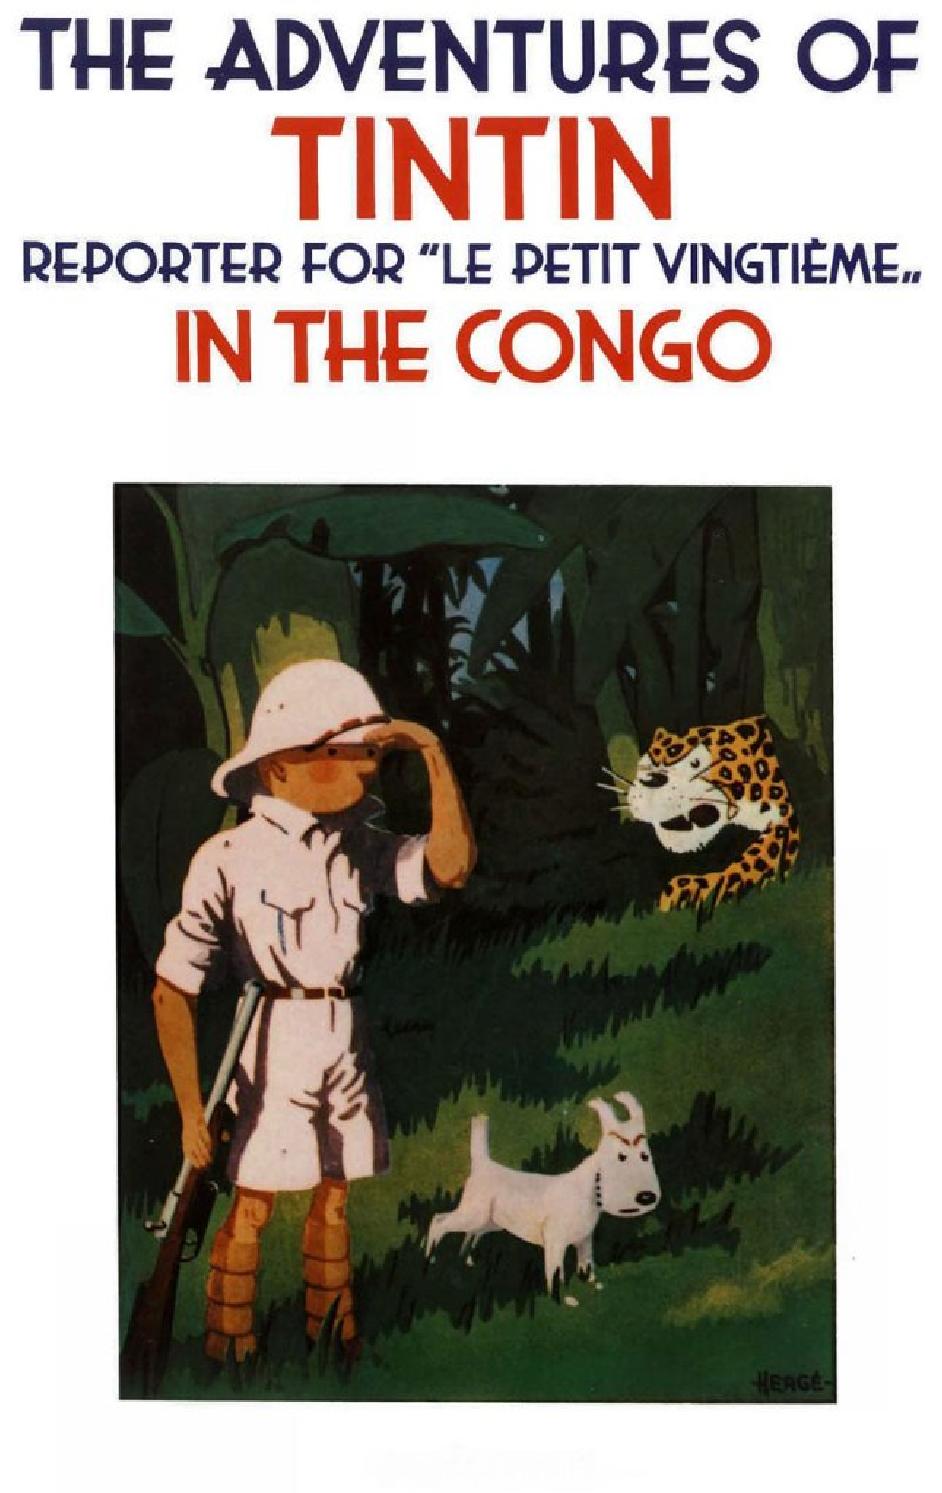 https://static.wikia.nocookie.net/tintin/images/5/52/Book_-2_.jpeg/revision/latest?cb=20190612165736